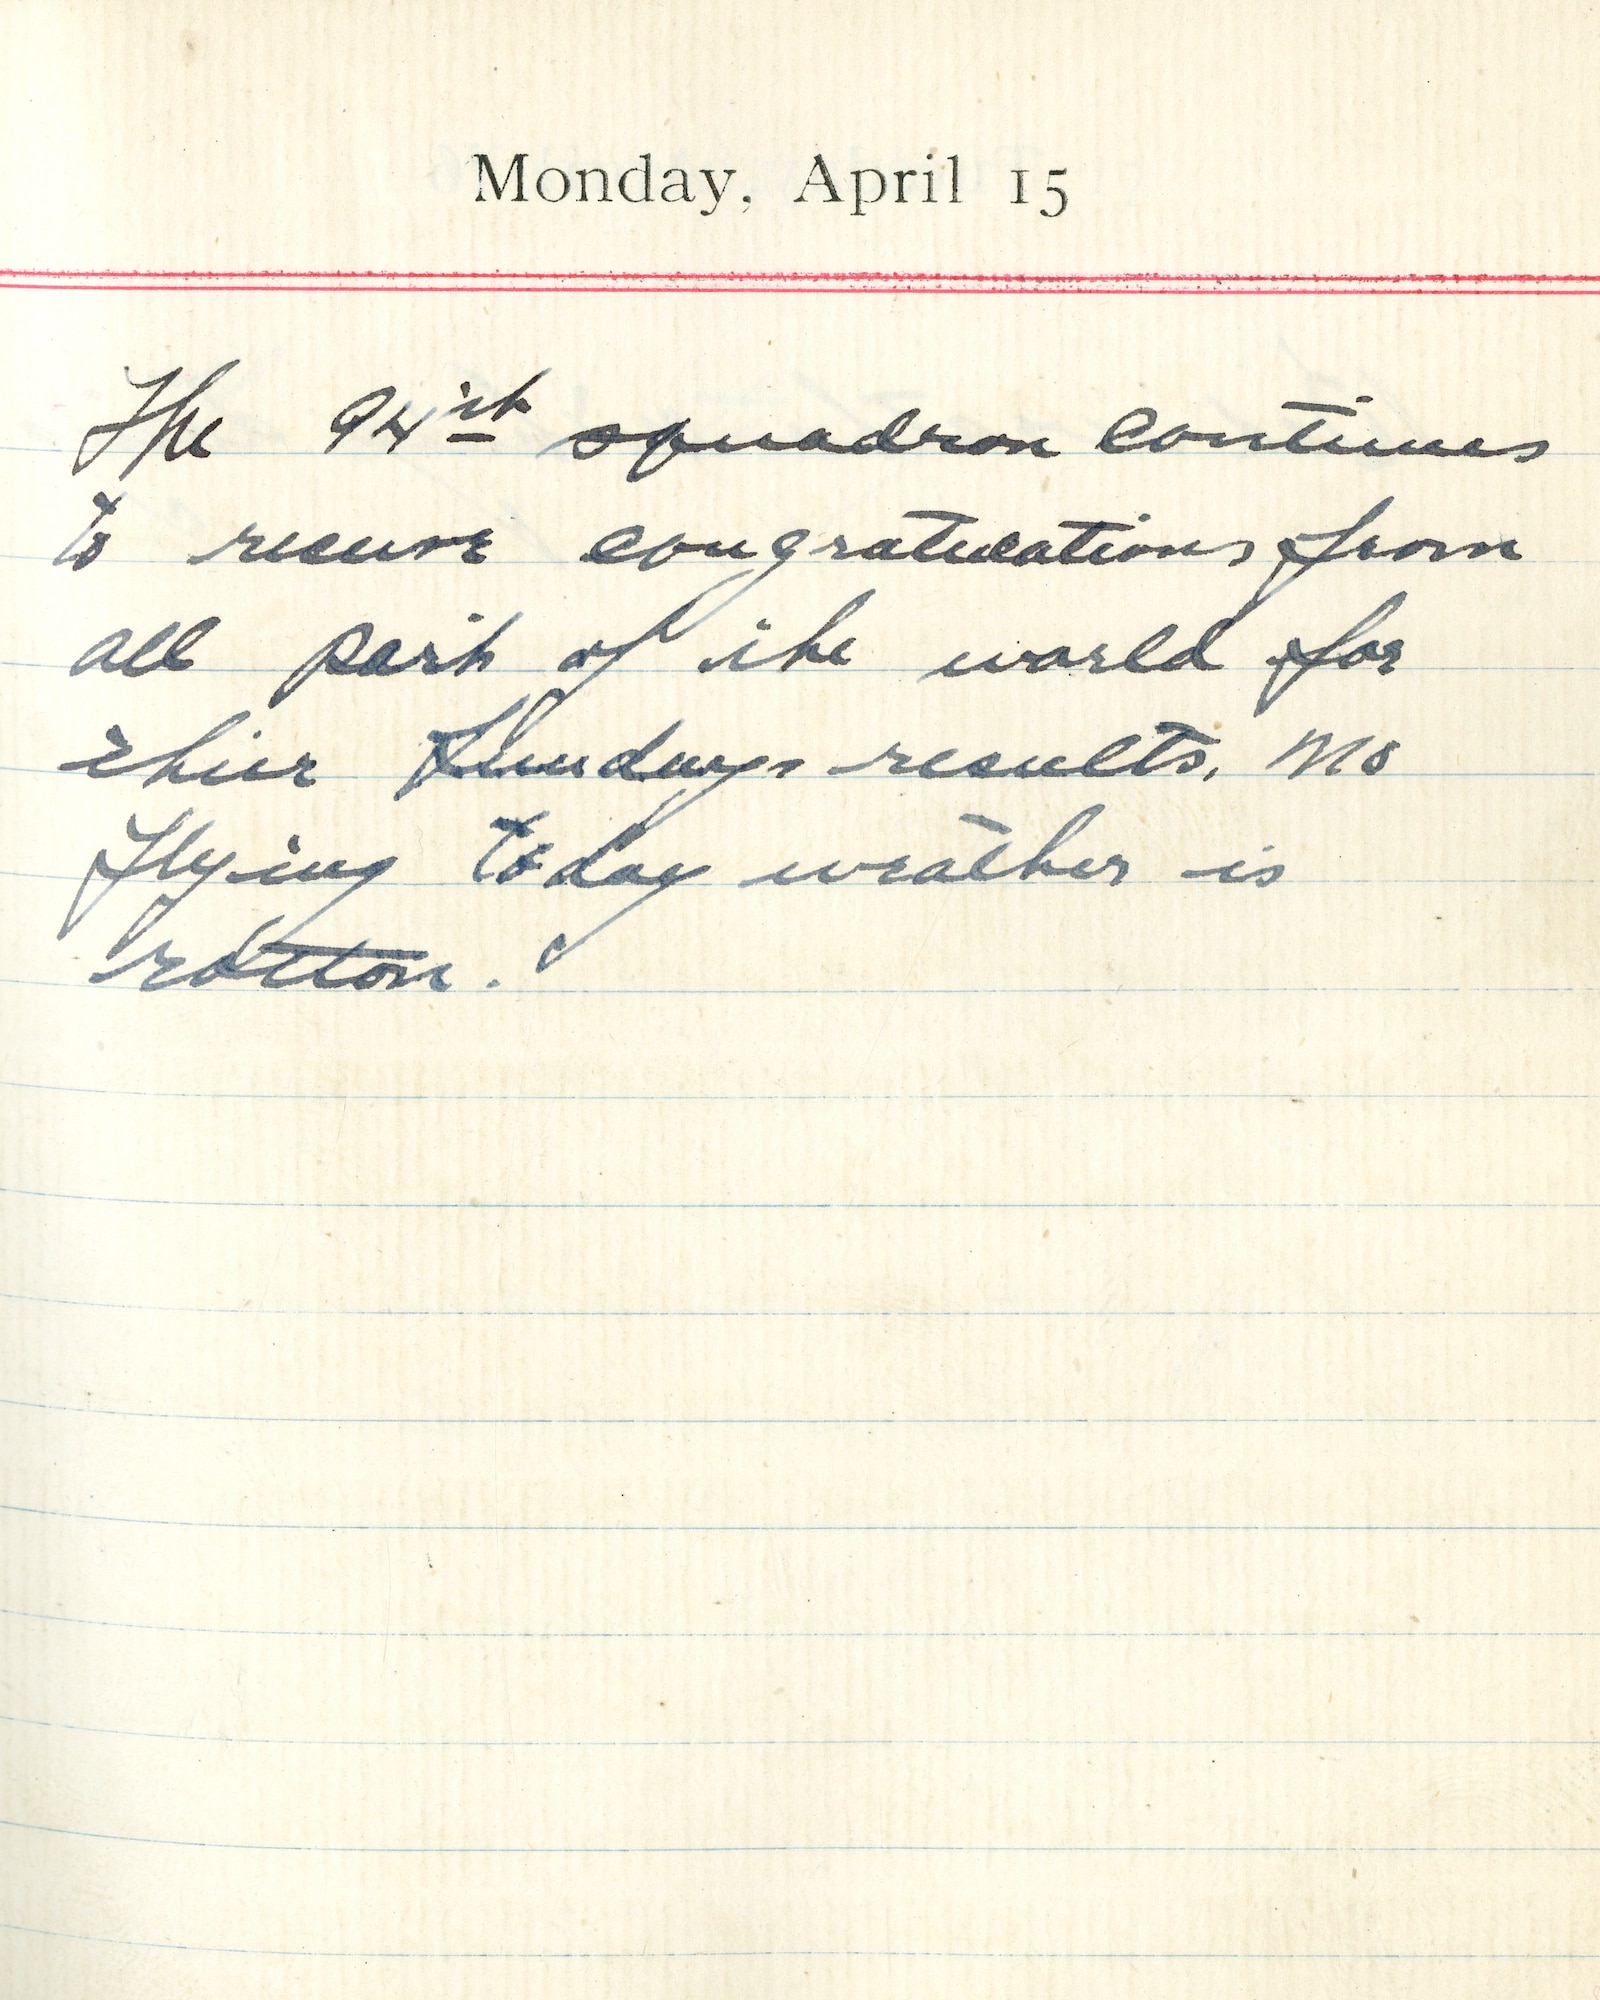 Capt. Edward V. Rickenbacker's 1918 wartime diary entry. (04/15/1918). The 94th squadron continues to receive congratulations from all parts of the world for their Sunday’s results.  No flying today, weather is rotten.